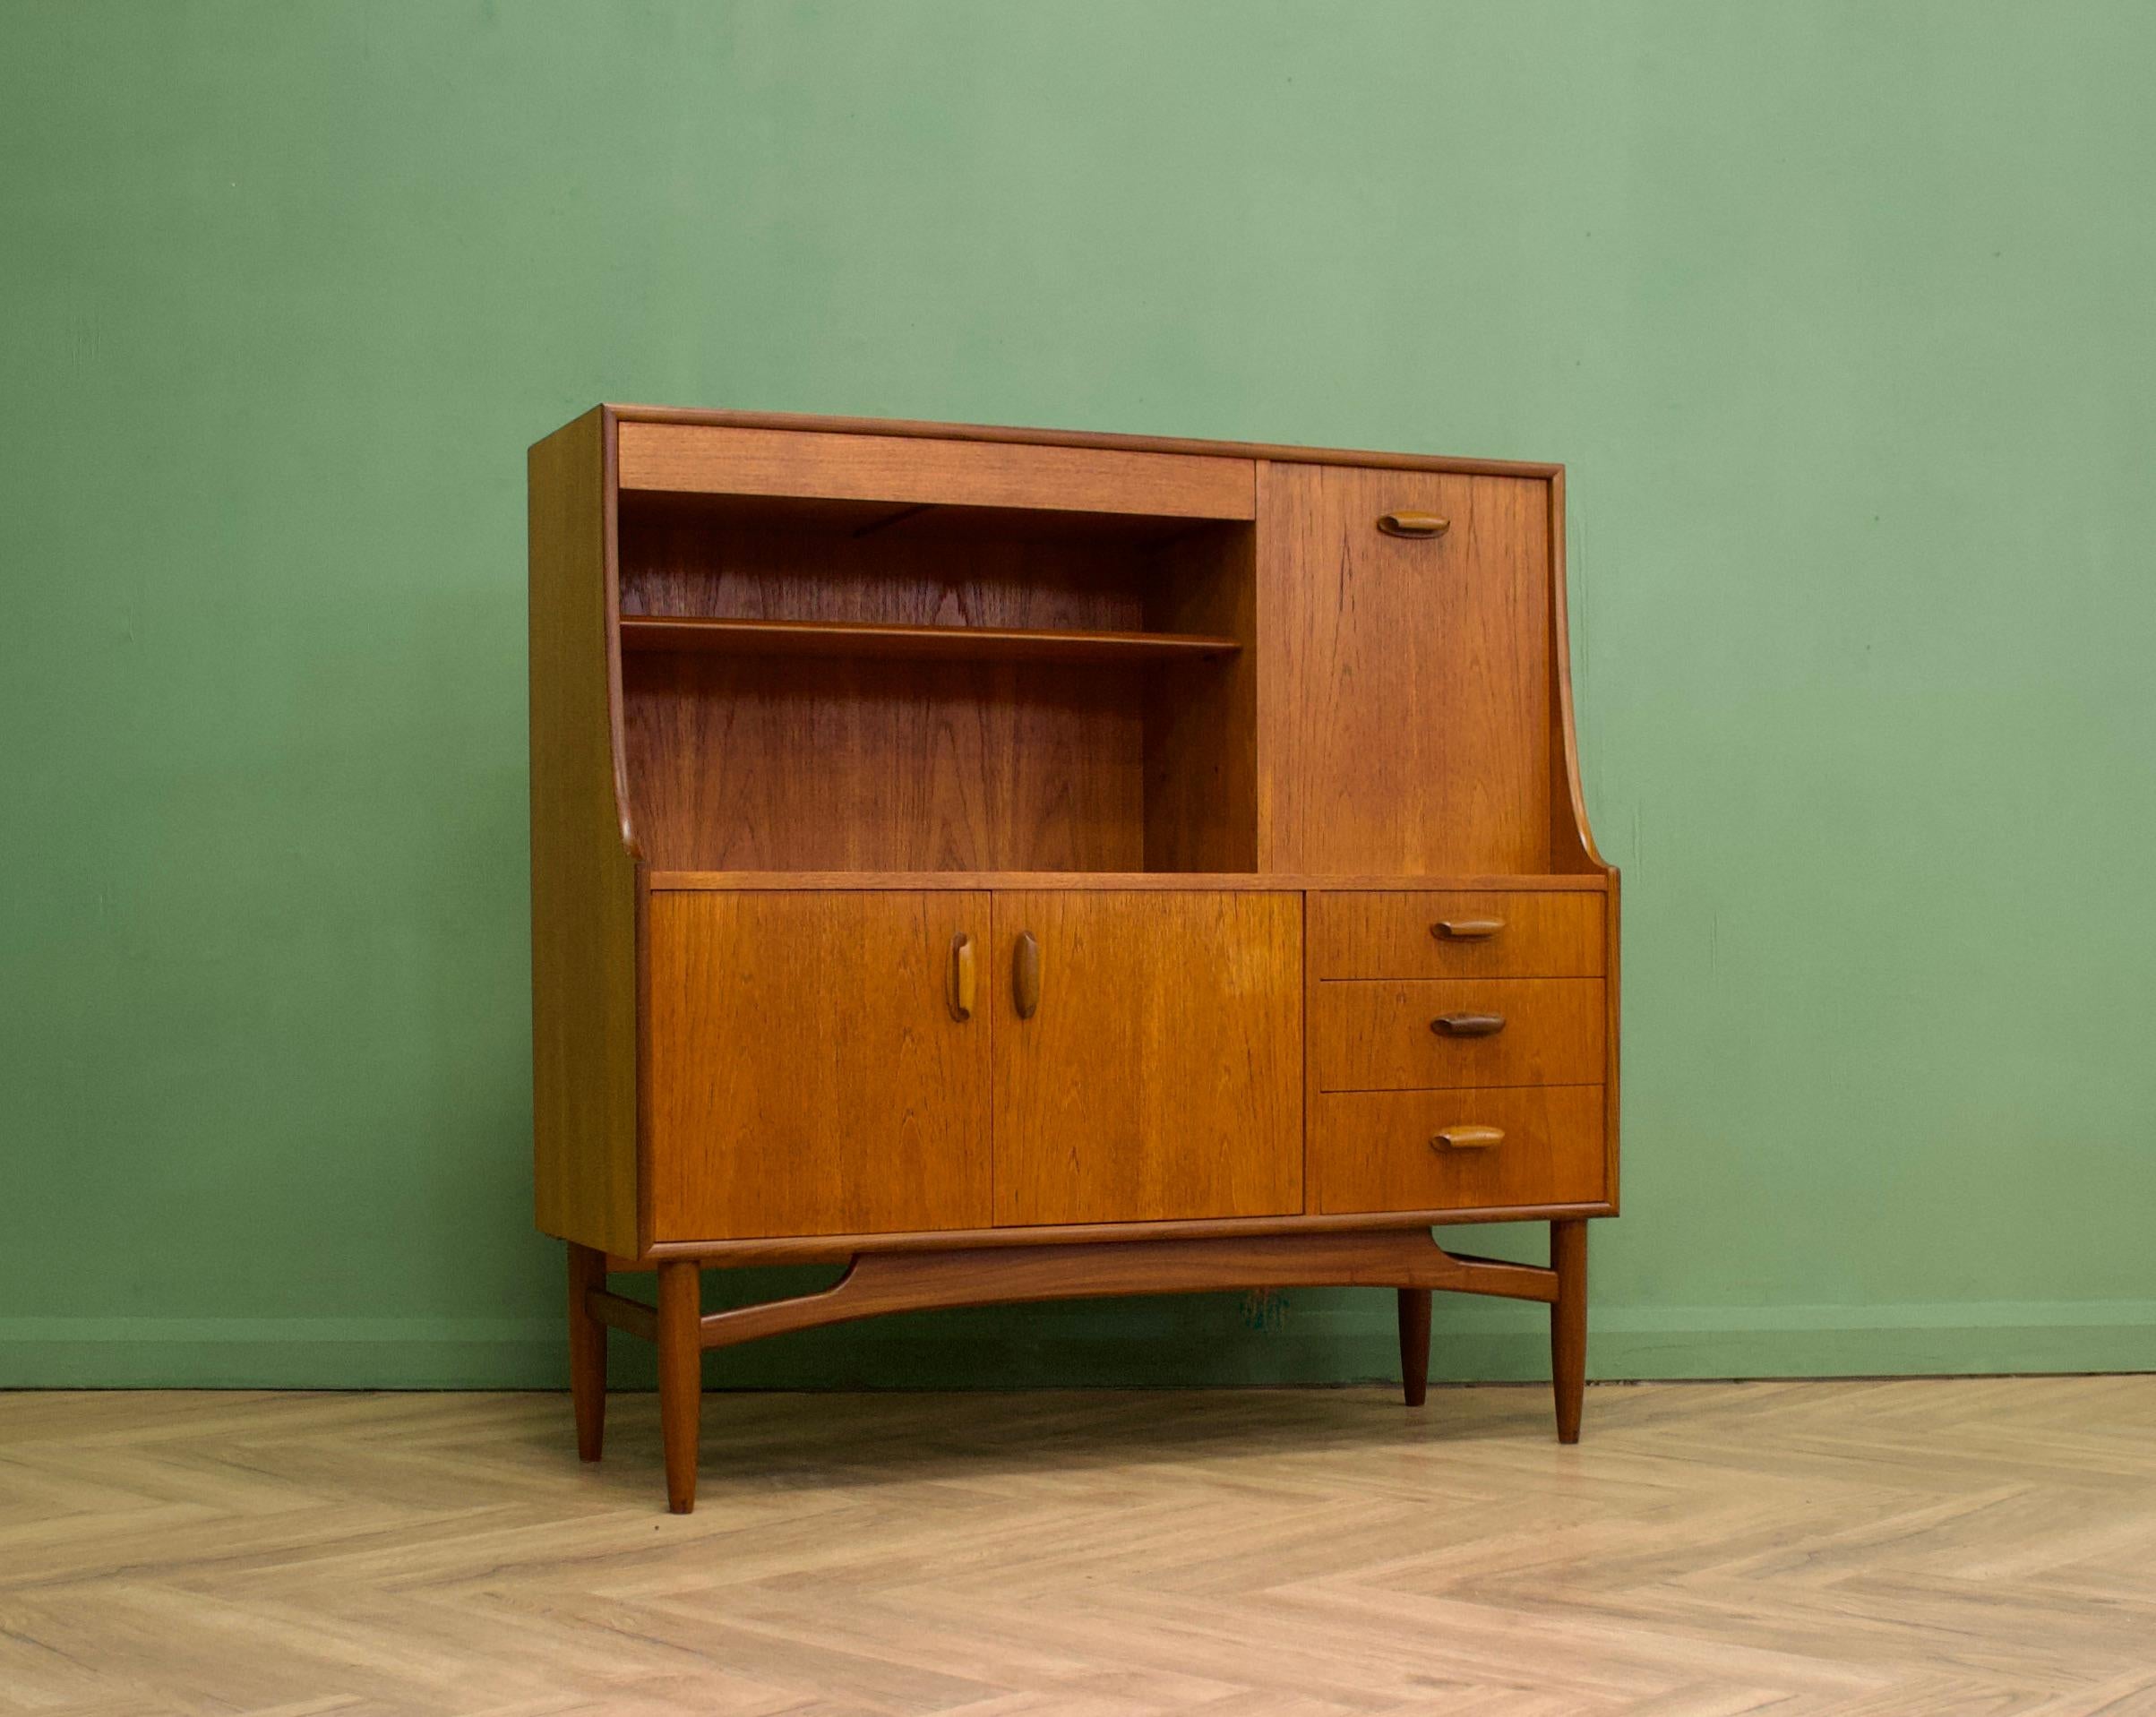 - Mid century modern highboard or sideboard
- Featuring a pull down drinks cabinet, a cupboard, three drawers and shelves
- Manufactured by G Plan in the UK
- Made from teak and teak veneer